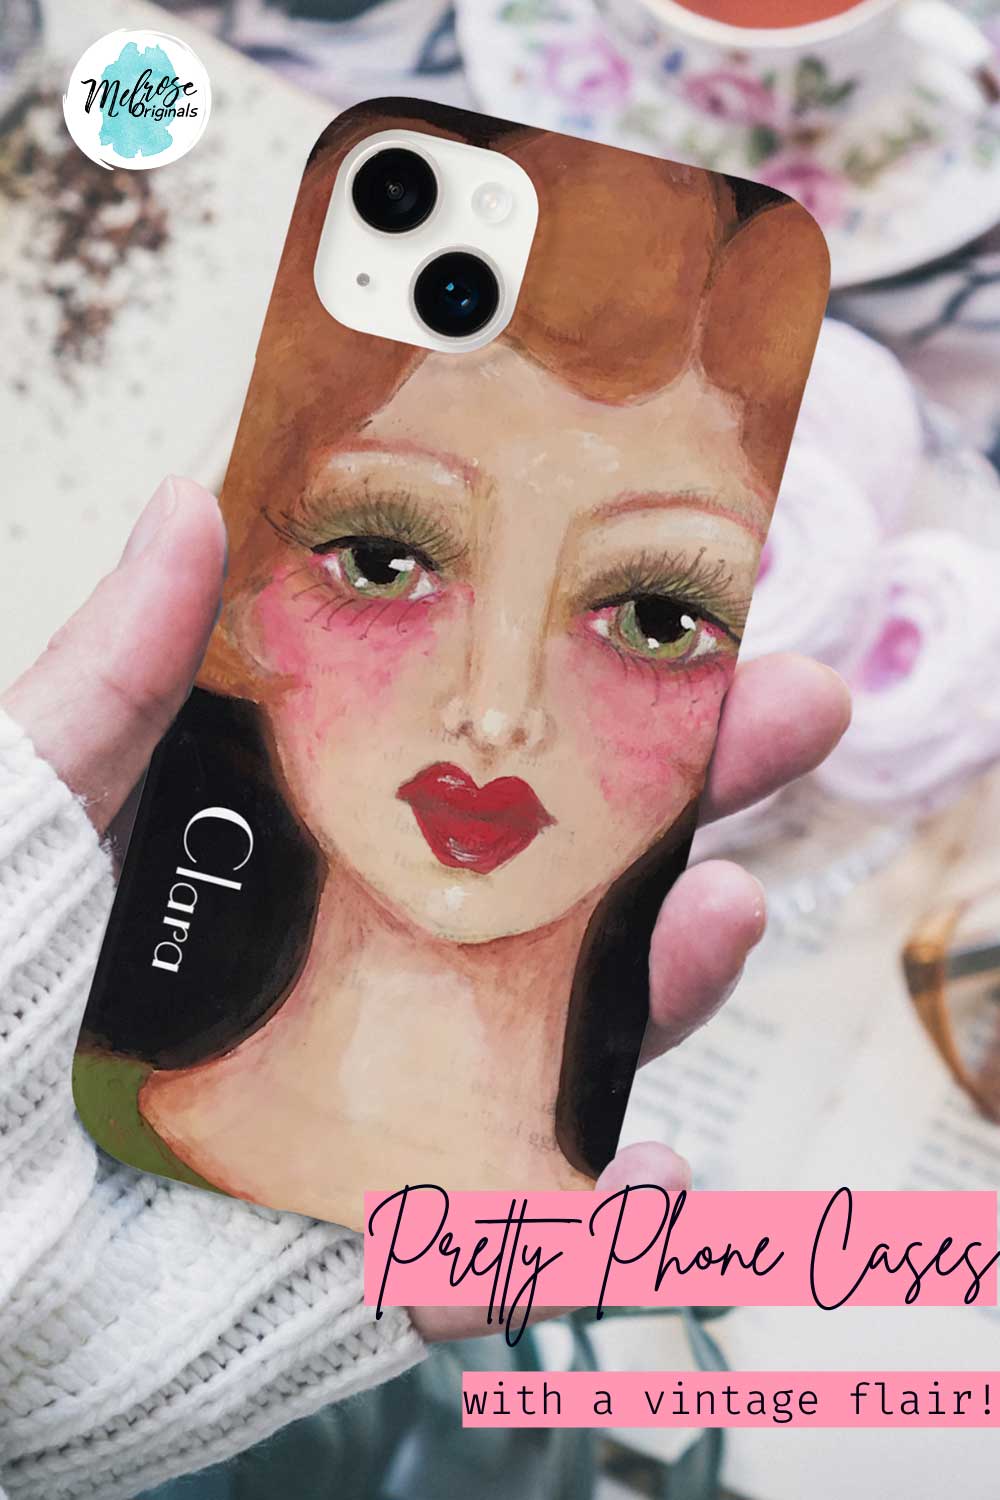 personalized phone case with vintage 1940's inspired whimsical woman art